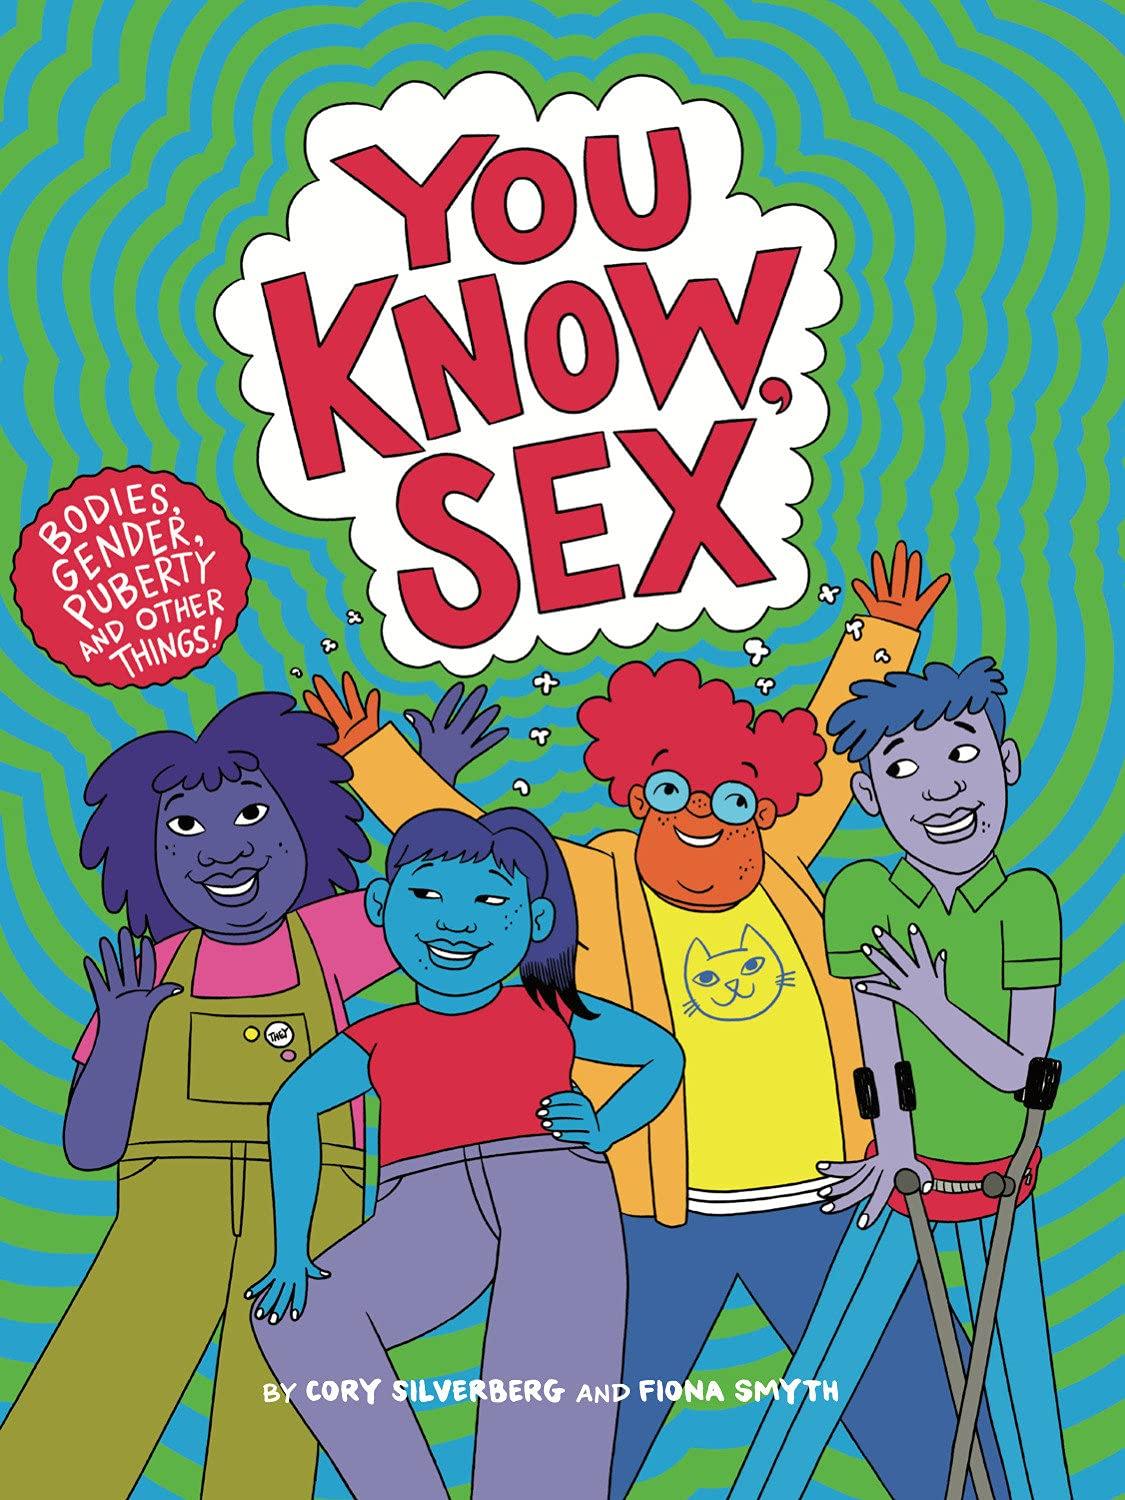 You Know, Sex: Bodies, Gender, Puberty, and Other Things - ShopQueer.co